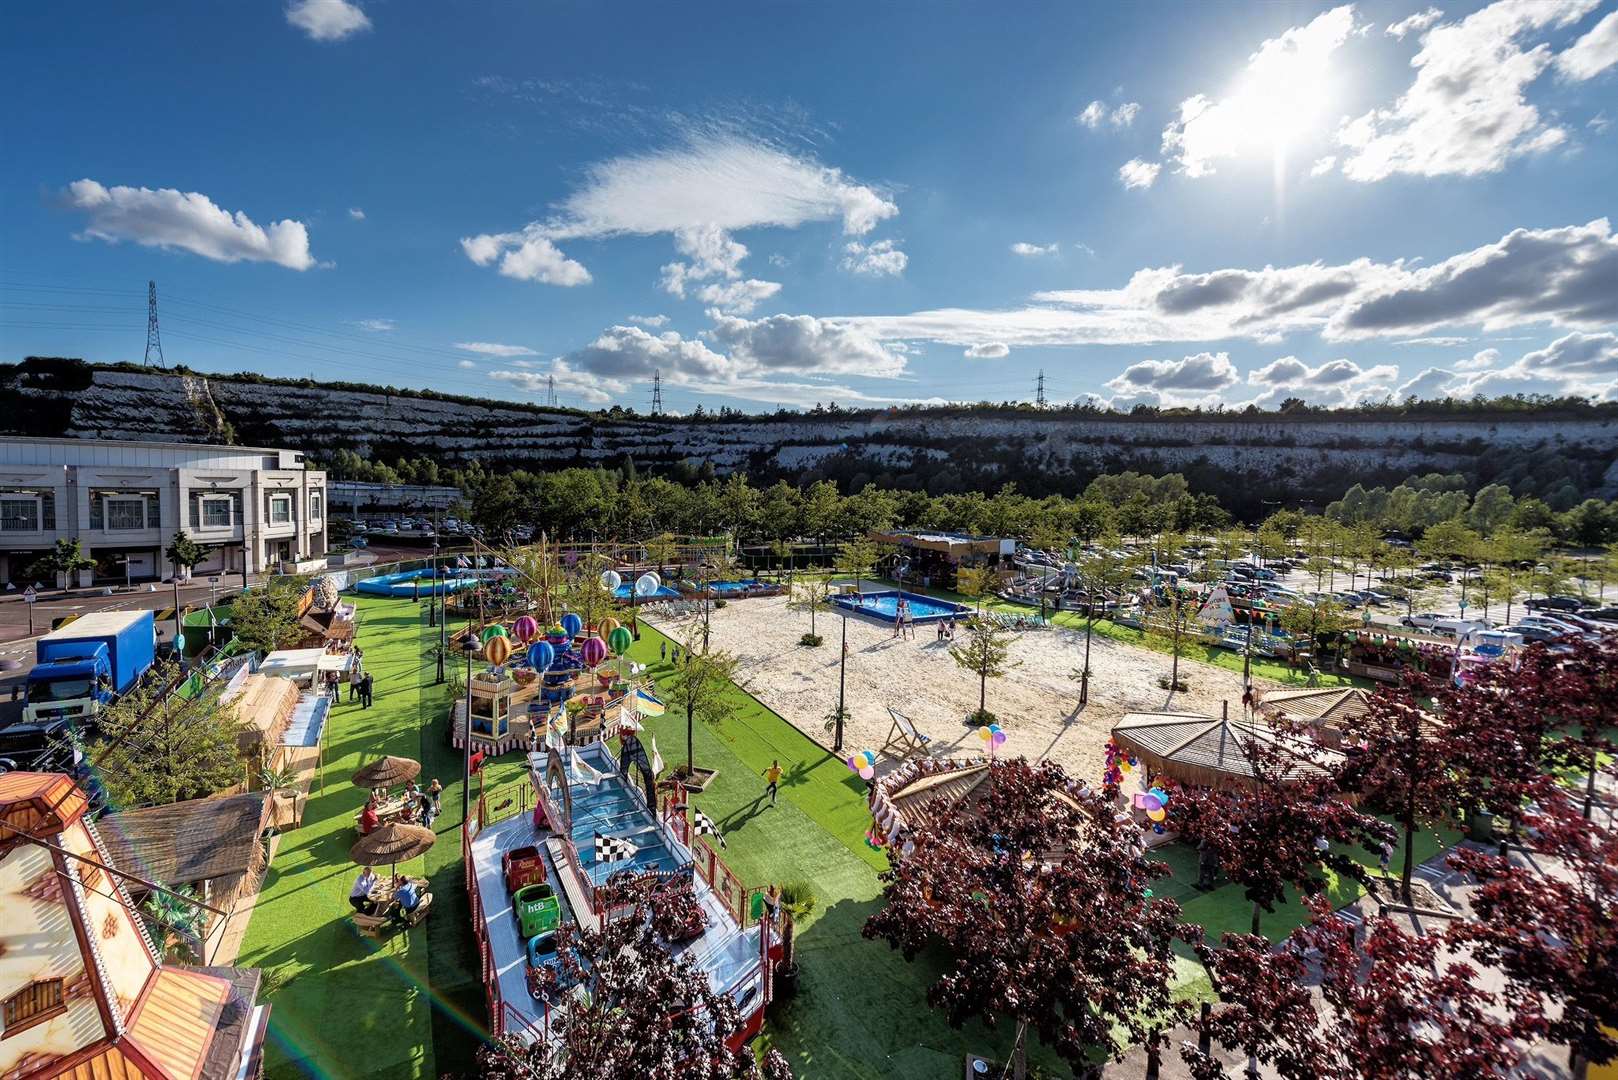 The Beach At Bluewater is a summer attraction and will remain open until September